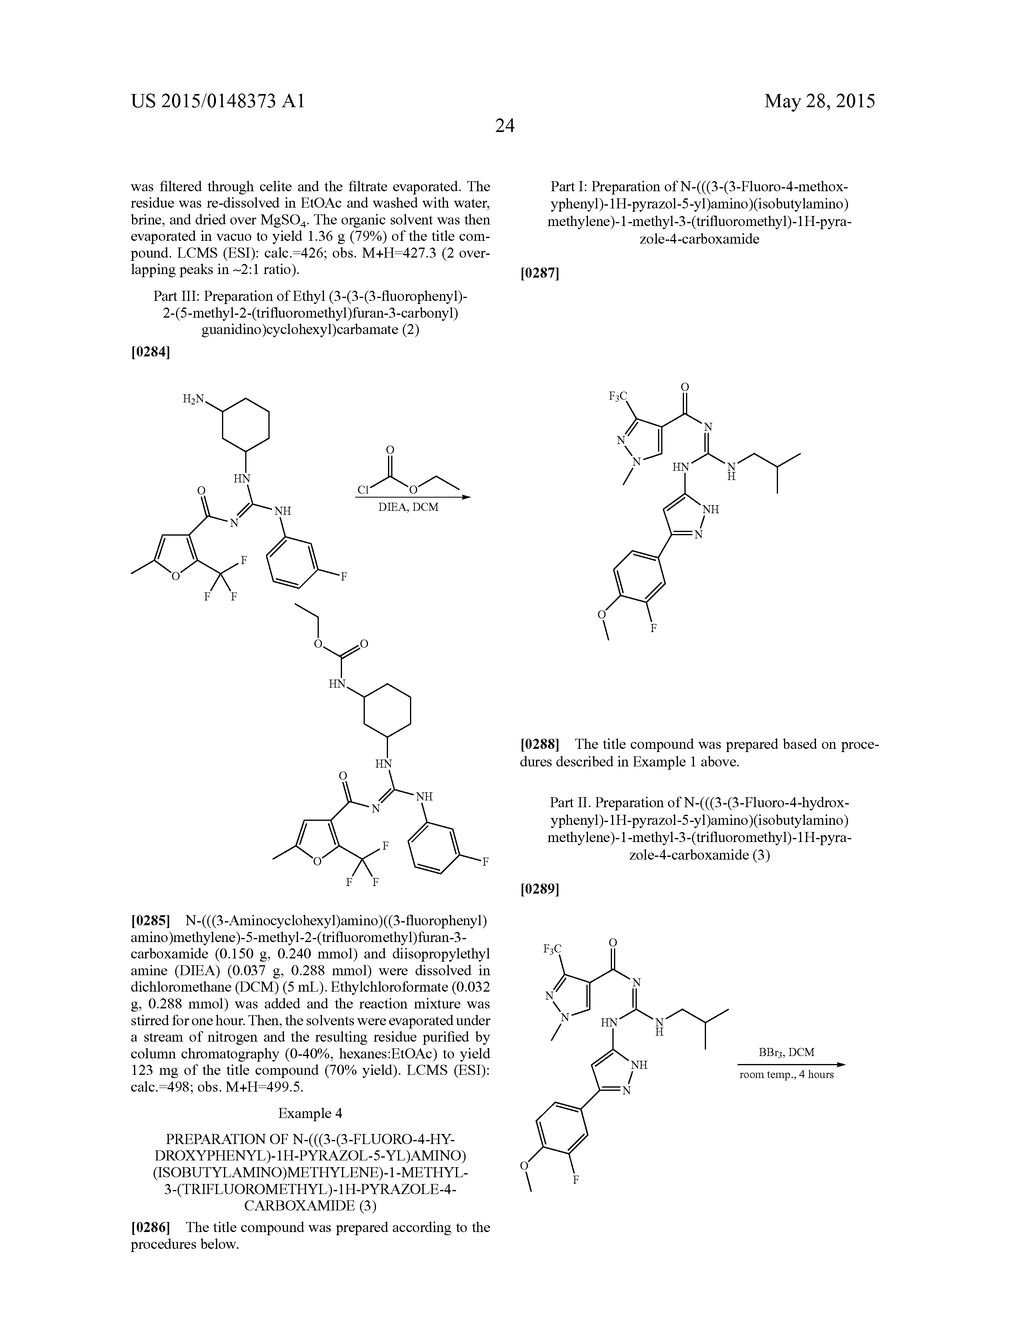 HETEROCYCLIC GUANIDINE F1F0-ATPASE INHIBITORS AND THERAPEUTIC USES THEREOF - diagram, schematic, and image 25